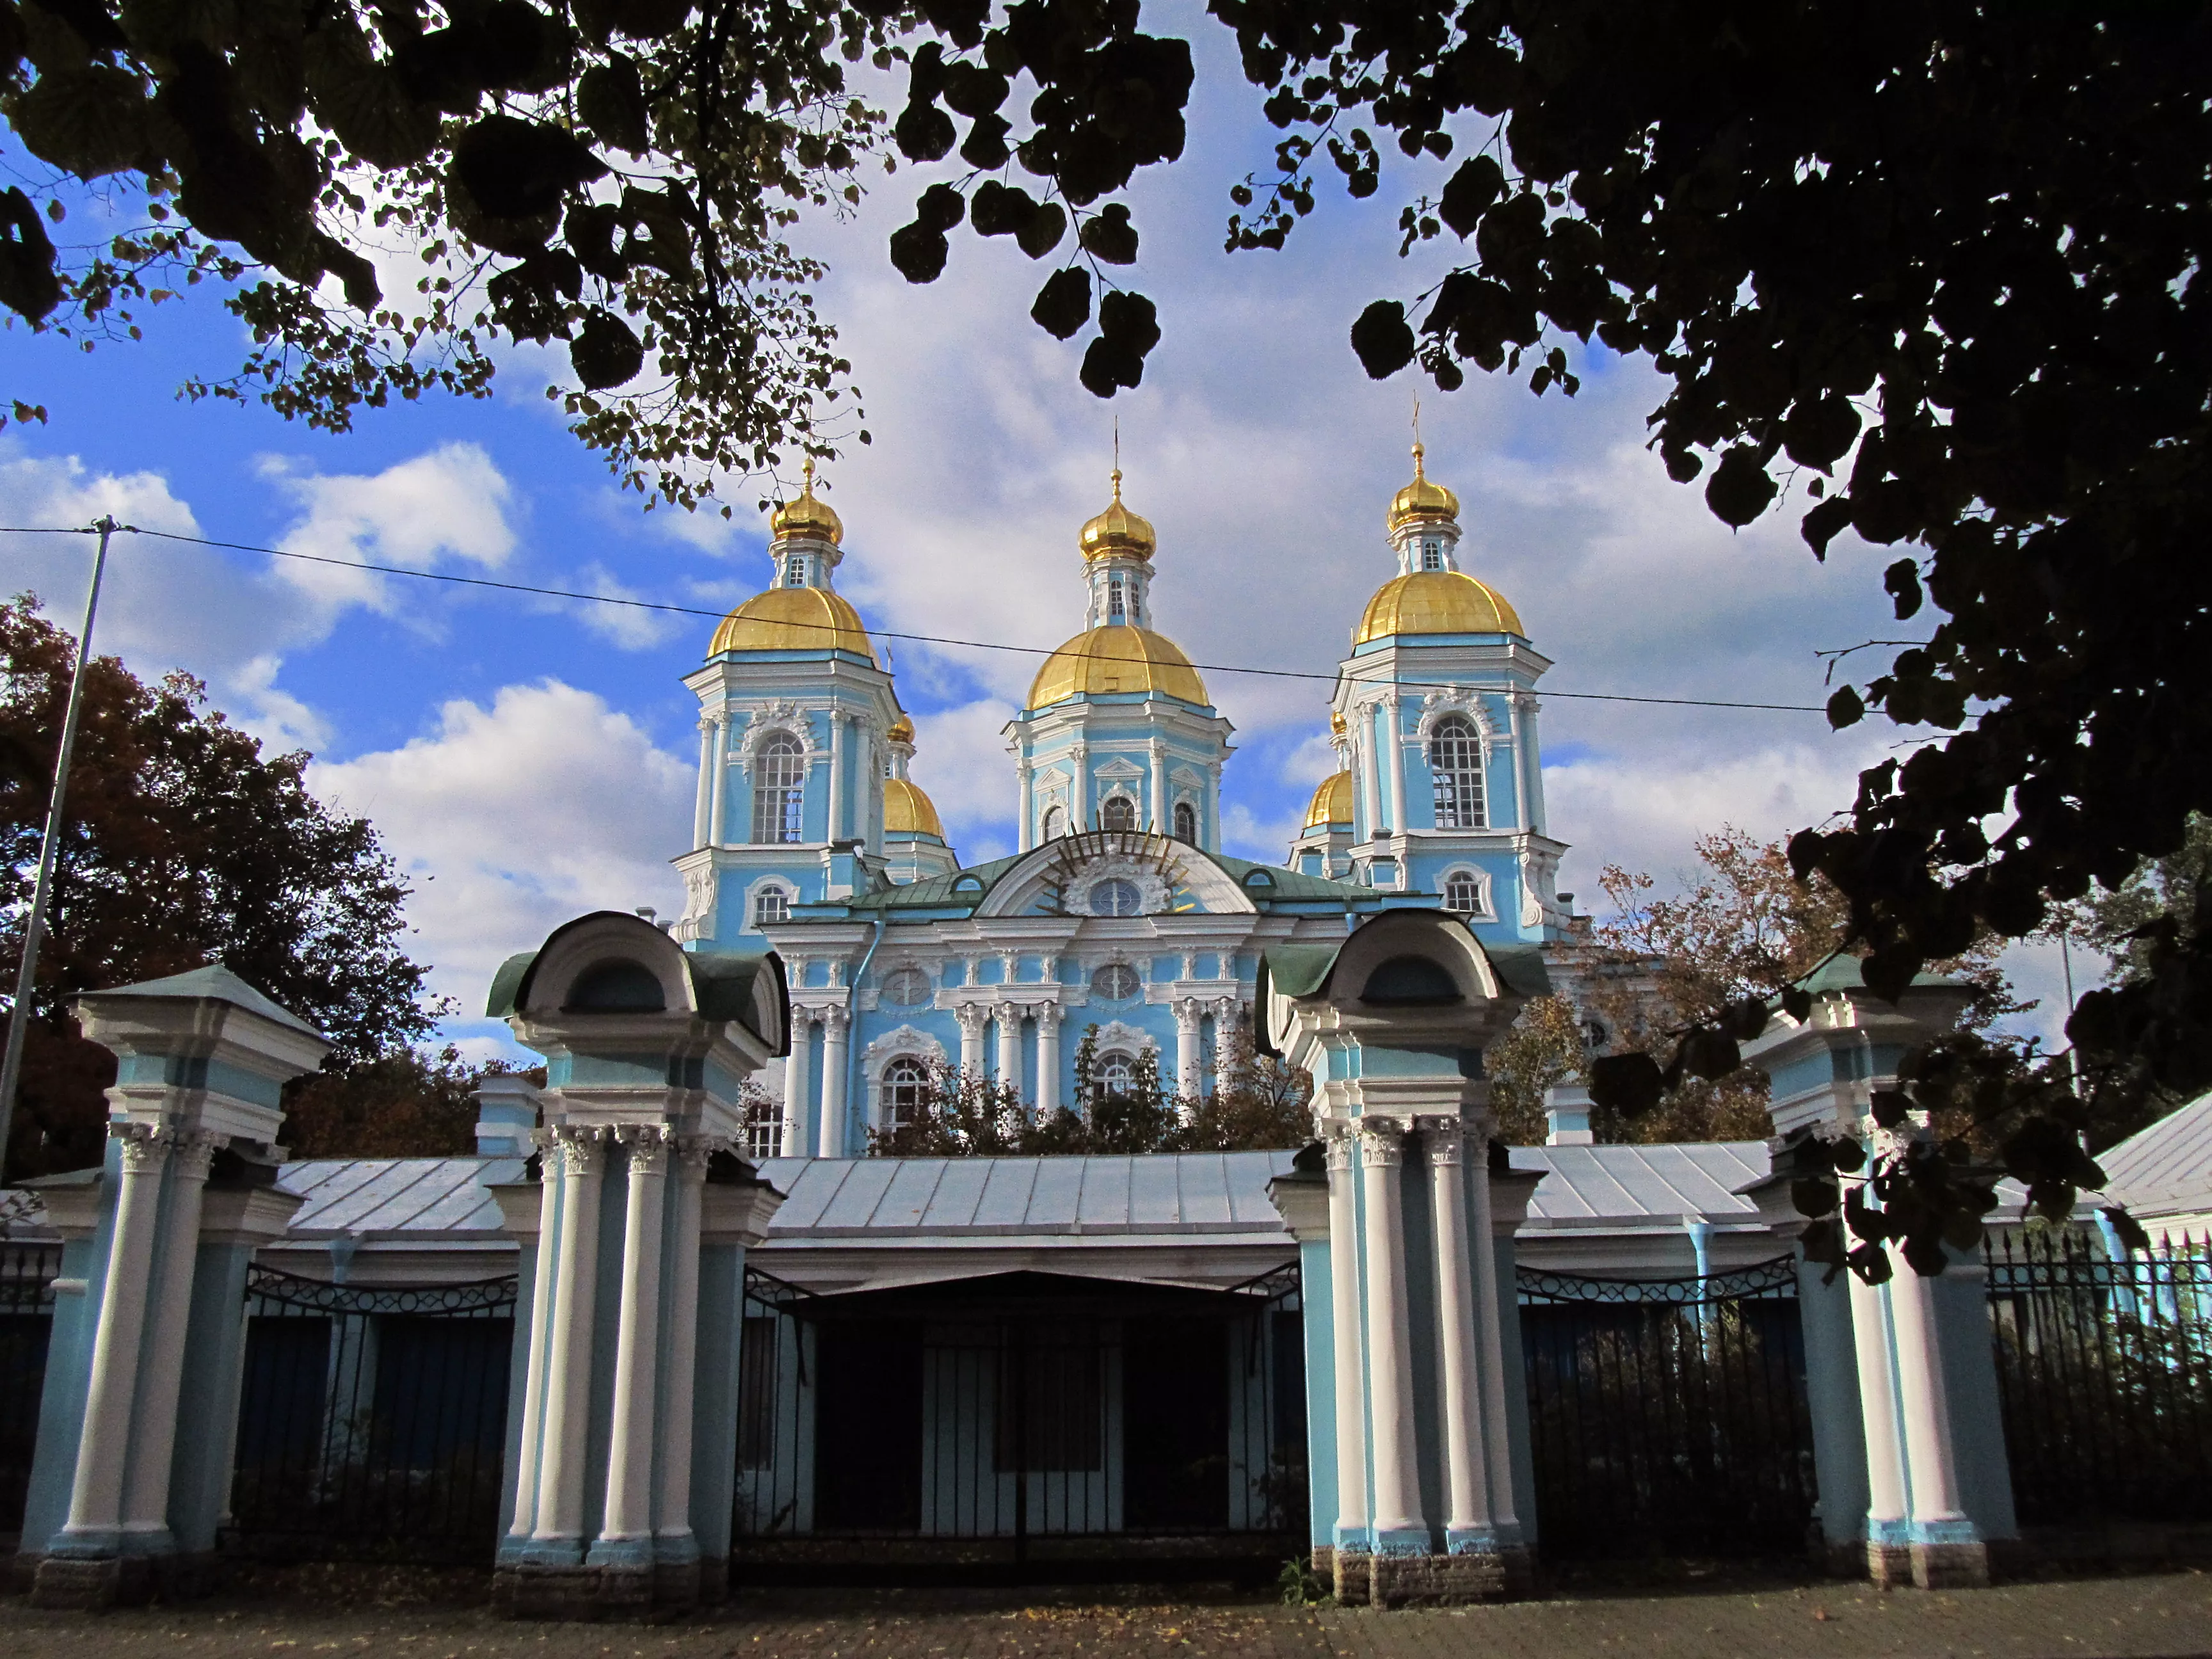 Nikolo-Epiphany Naval Cathedral in Russia, Europe | Architecture - Rated 3.9